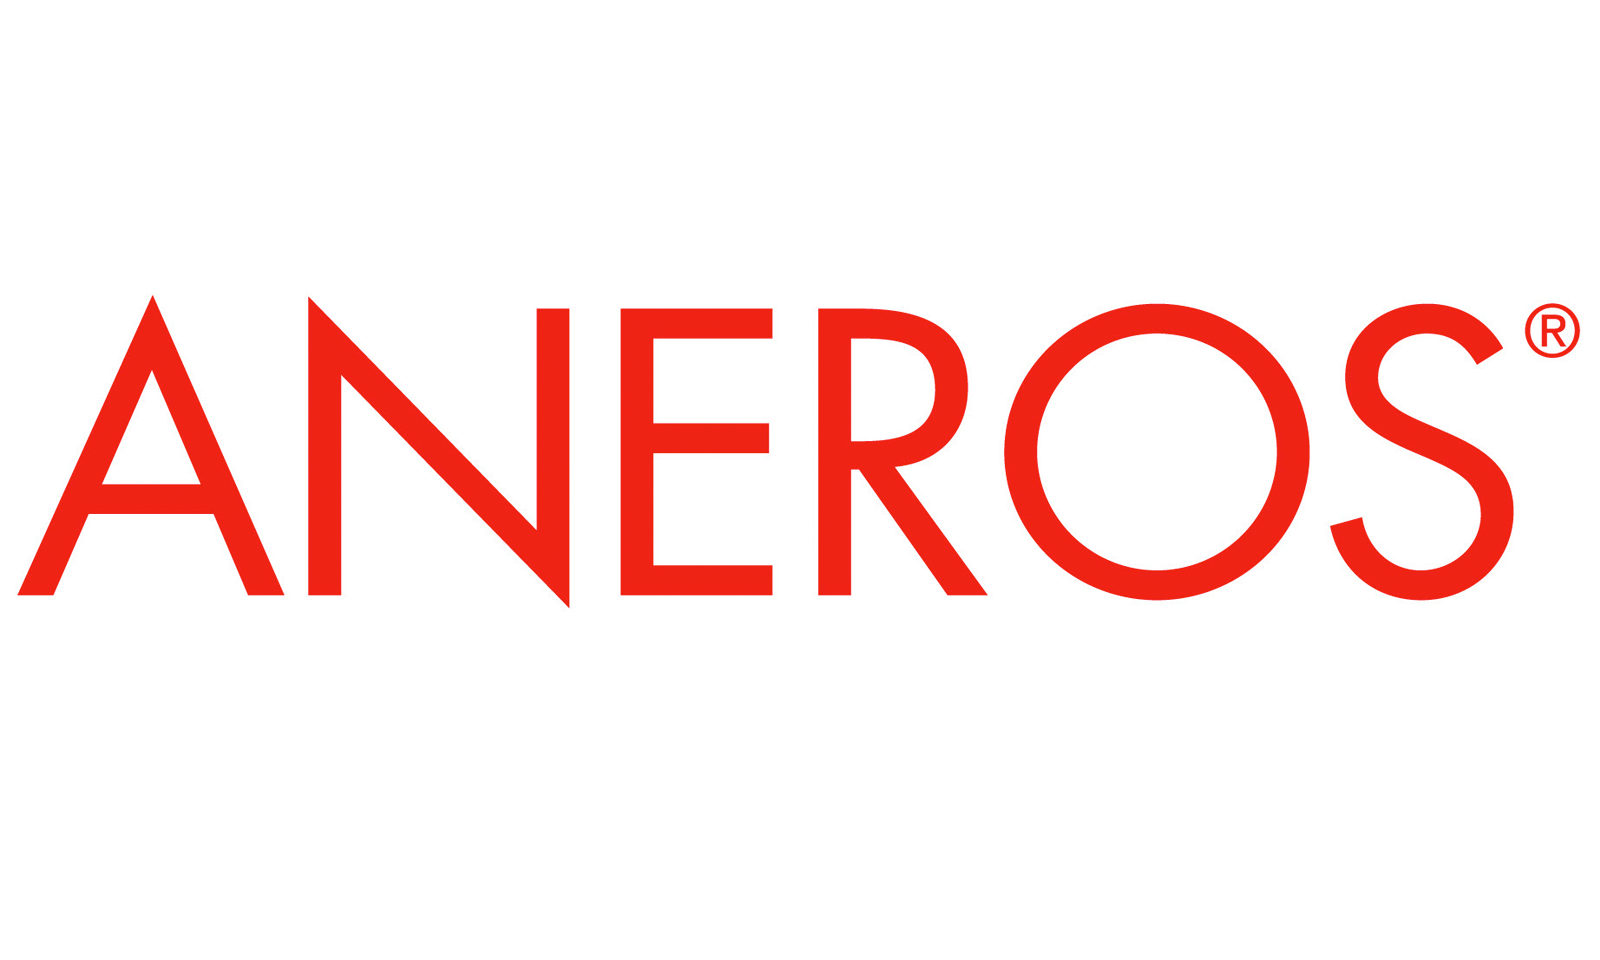 Aneros Teams with Nationwide Retailers for Social Media Contest